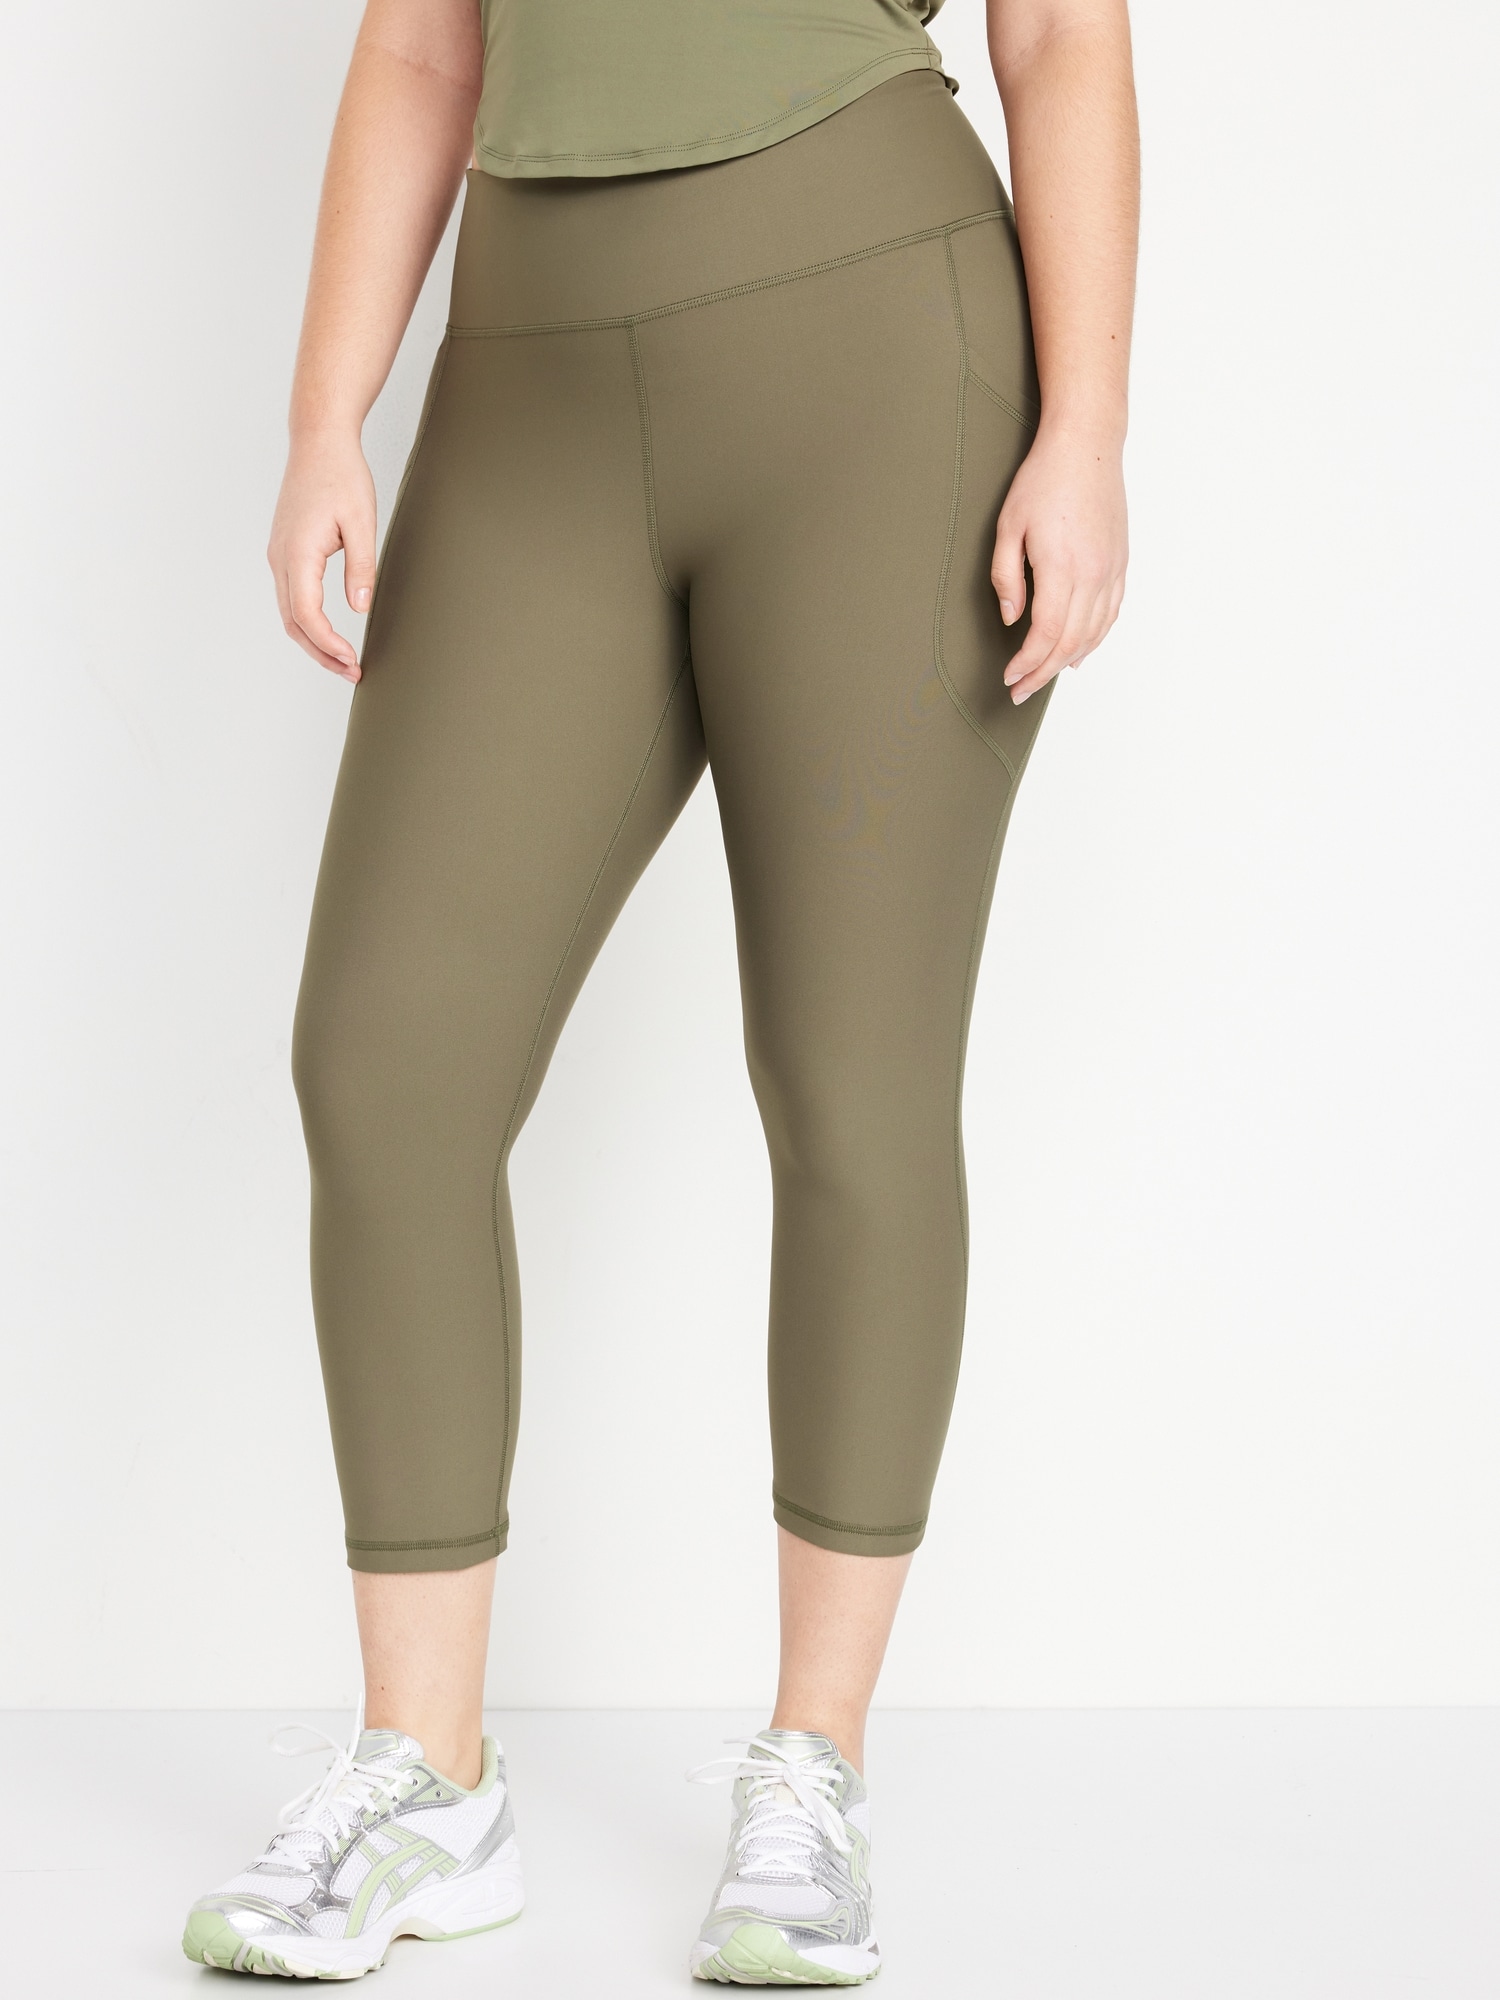 High-Waisted PowerSoft Crop Leggings for Women -- 16-inch inseam